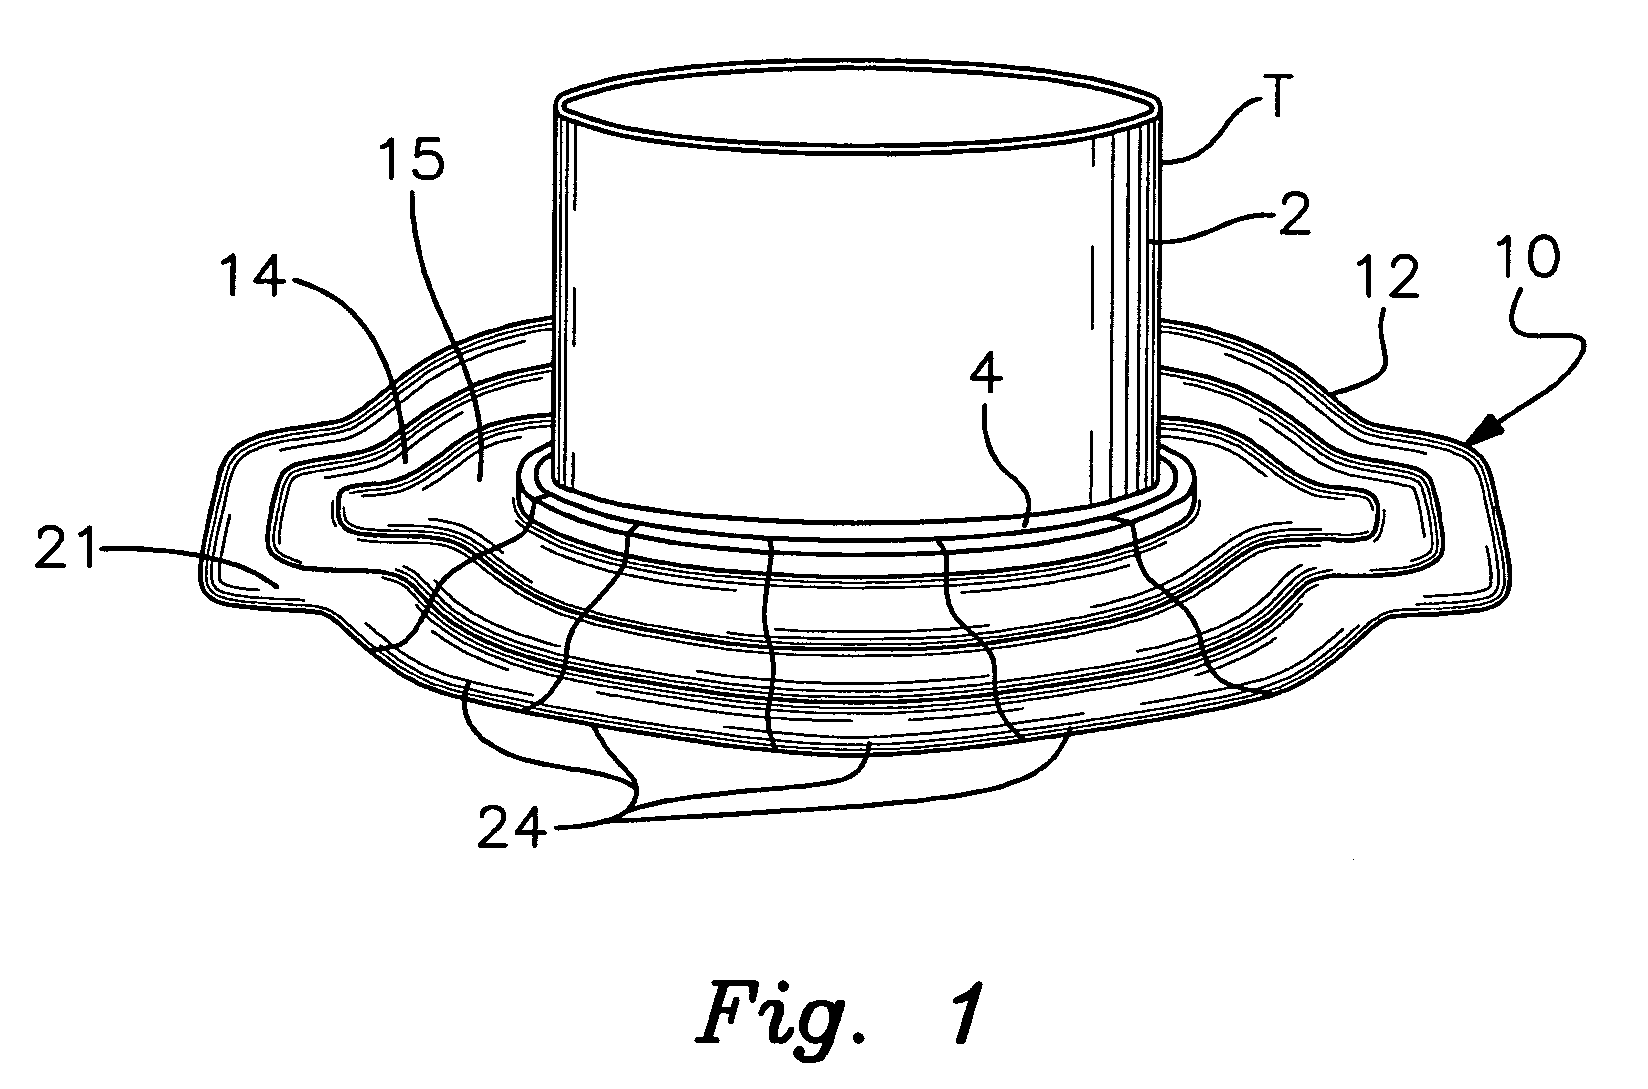 Secondary containment panels and process for making and installing same